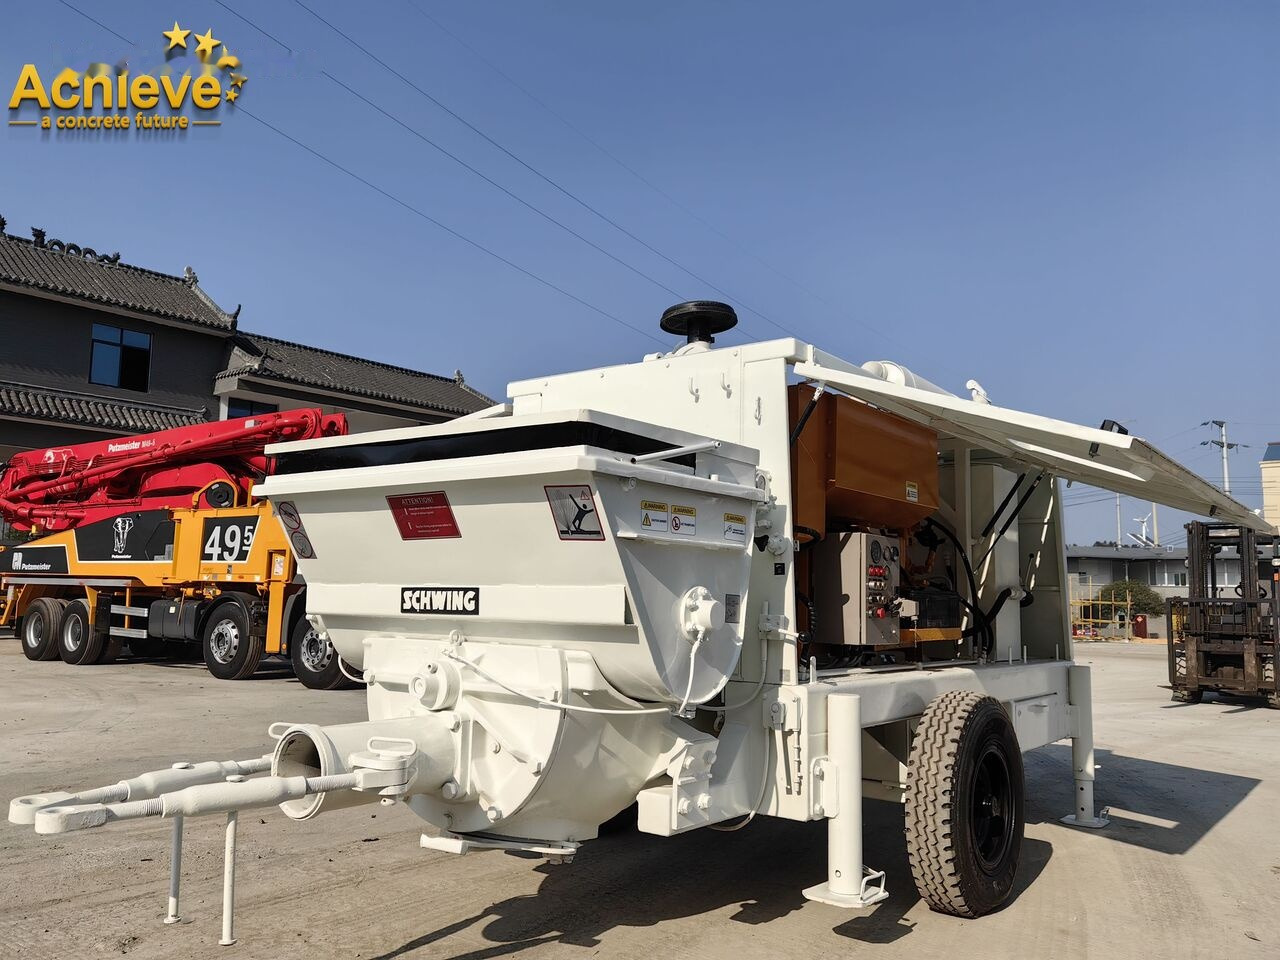 New Stationary concrete pump Schwing 【ACHIEVE】TOP CONDITION!!! Schwing Concrete Pump With Brand New H: picture 5